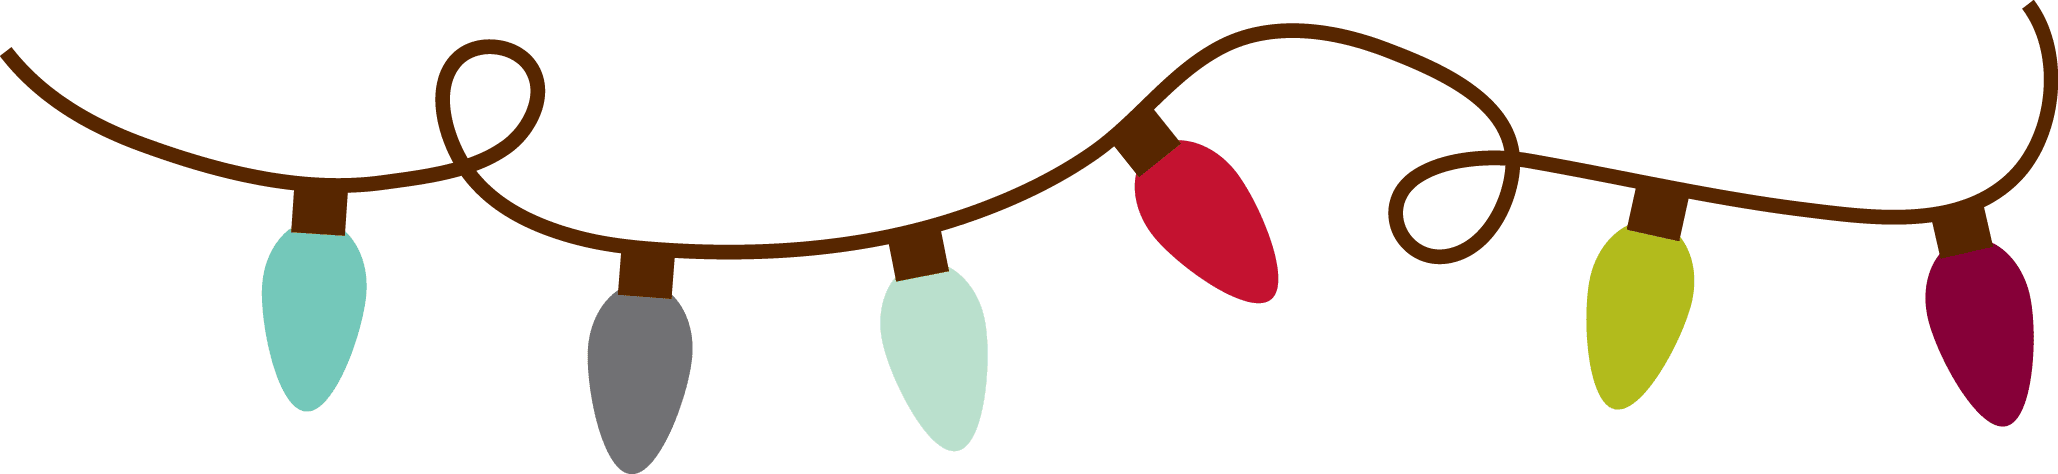 string of christmas lights clipart - photo #22